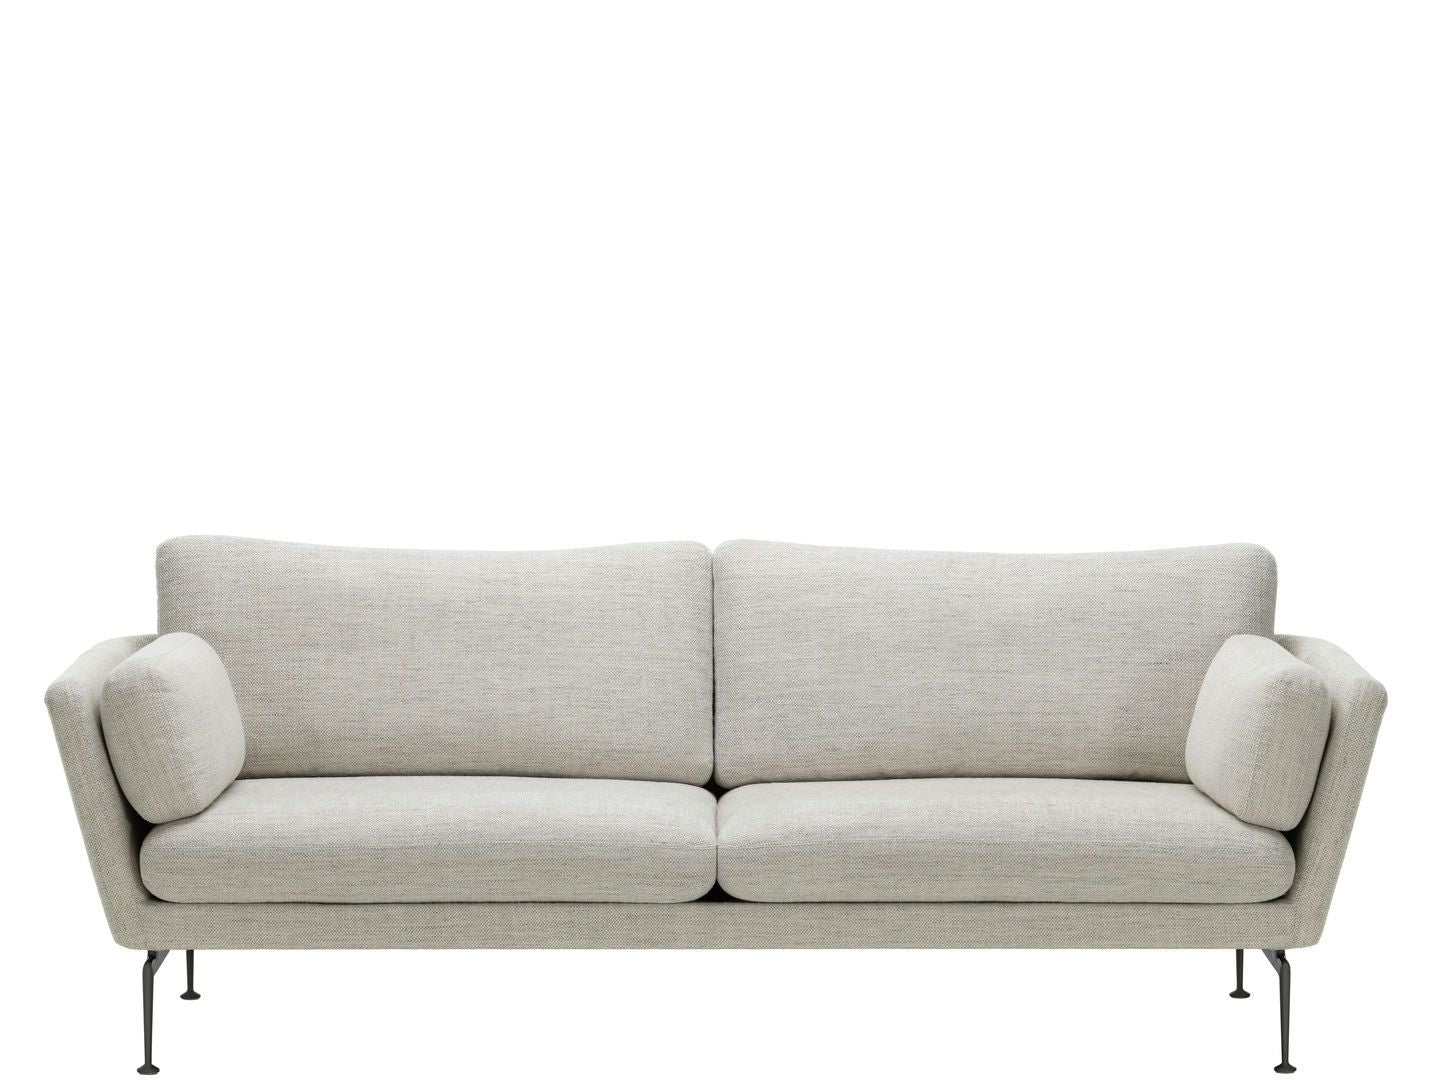 Vitra Suita 3-seater Sofa, Classic Design - Perfect for Any Home or Office.